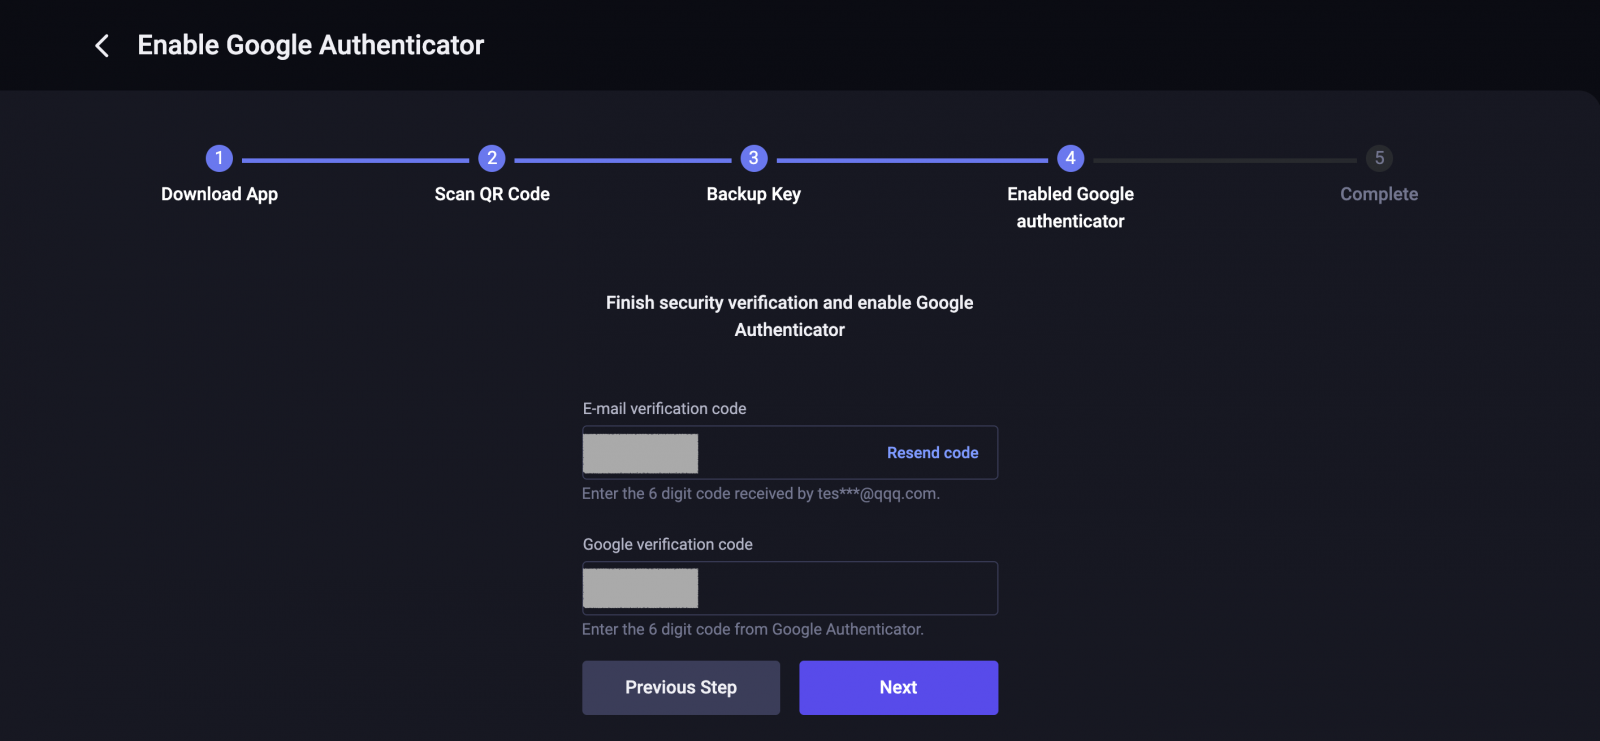 How to Verify Account in ApolloX